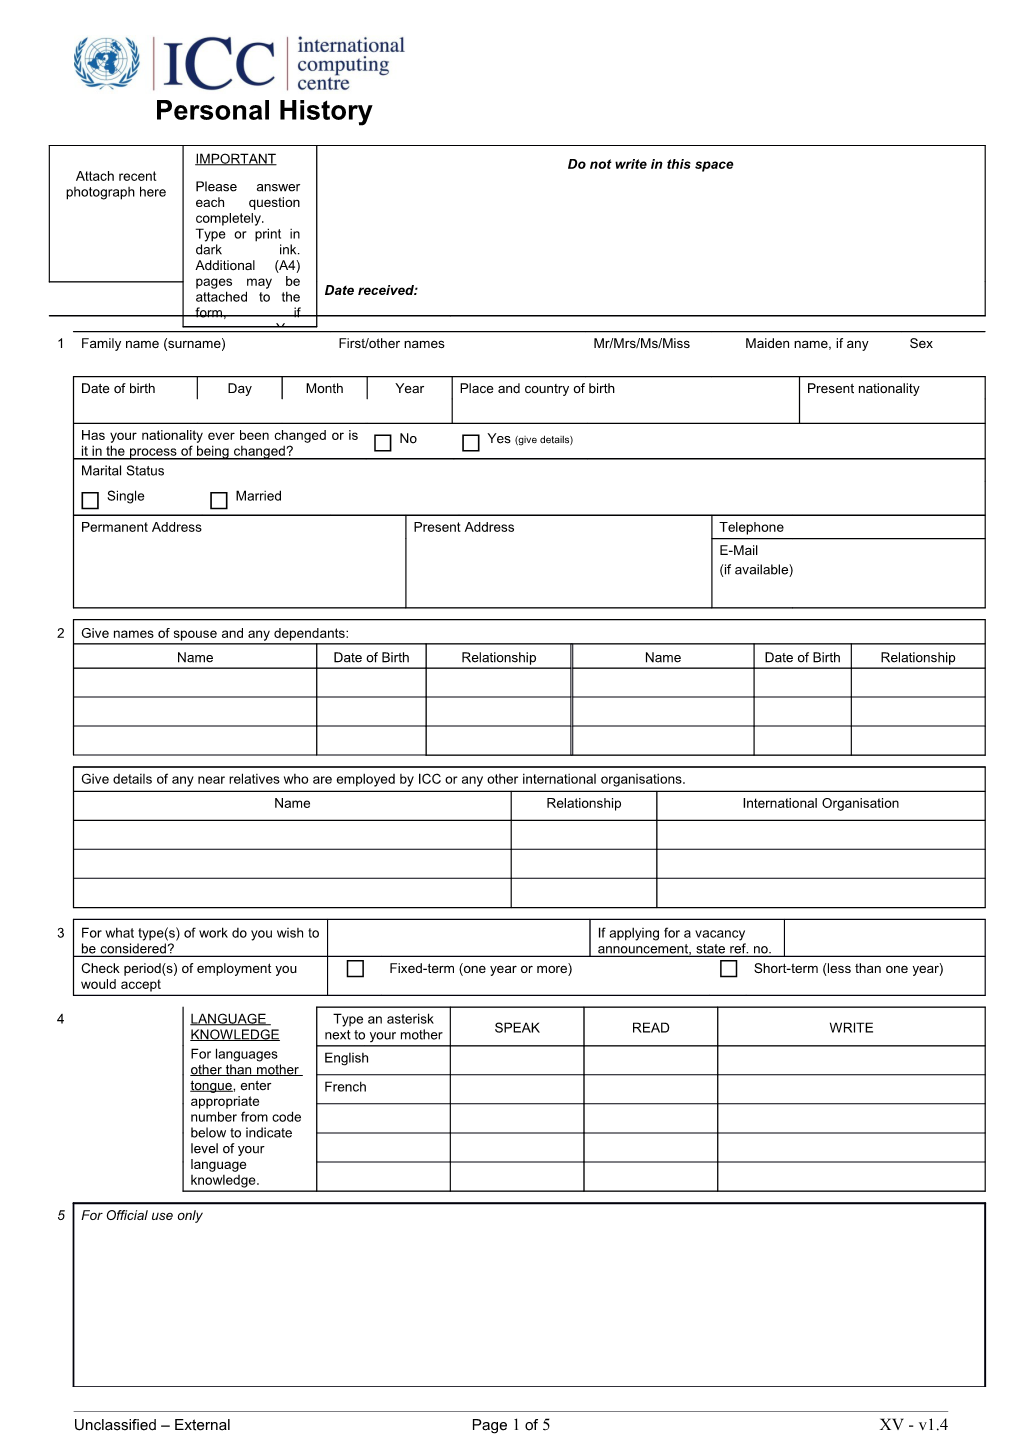 Personal History Form for Applications at ICC